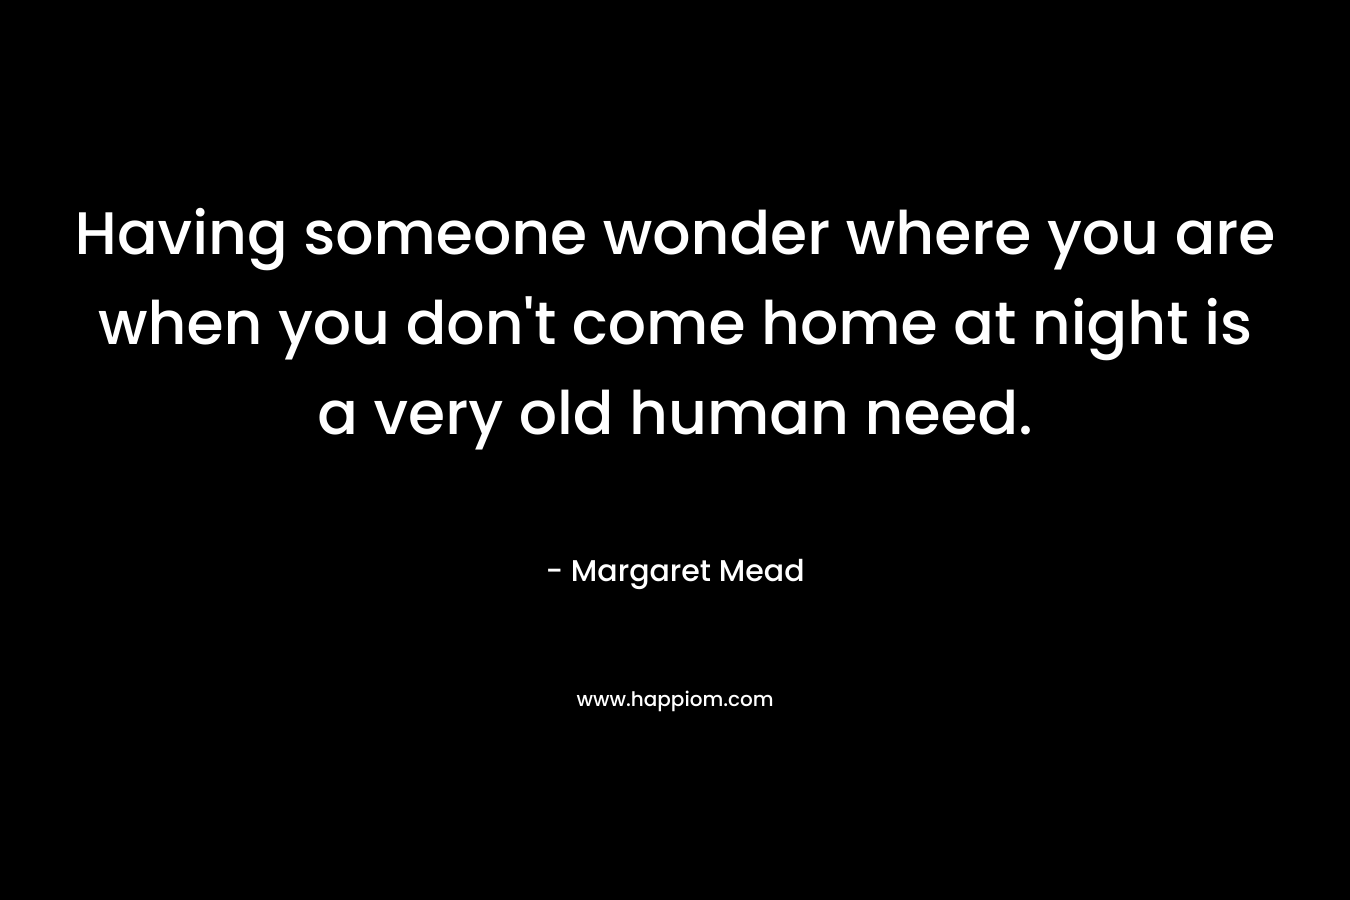 Having someone wonder where you are when you don't come home at night is a very old human need. 